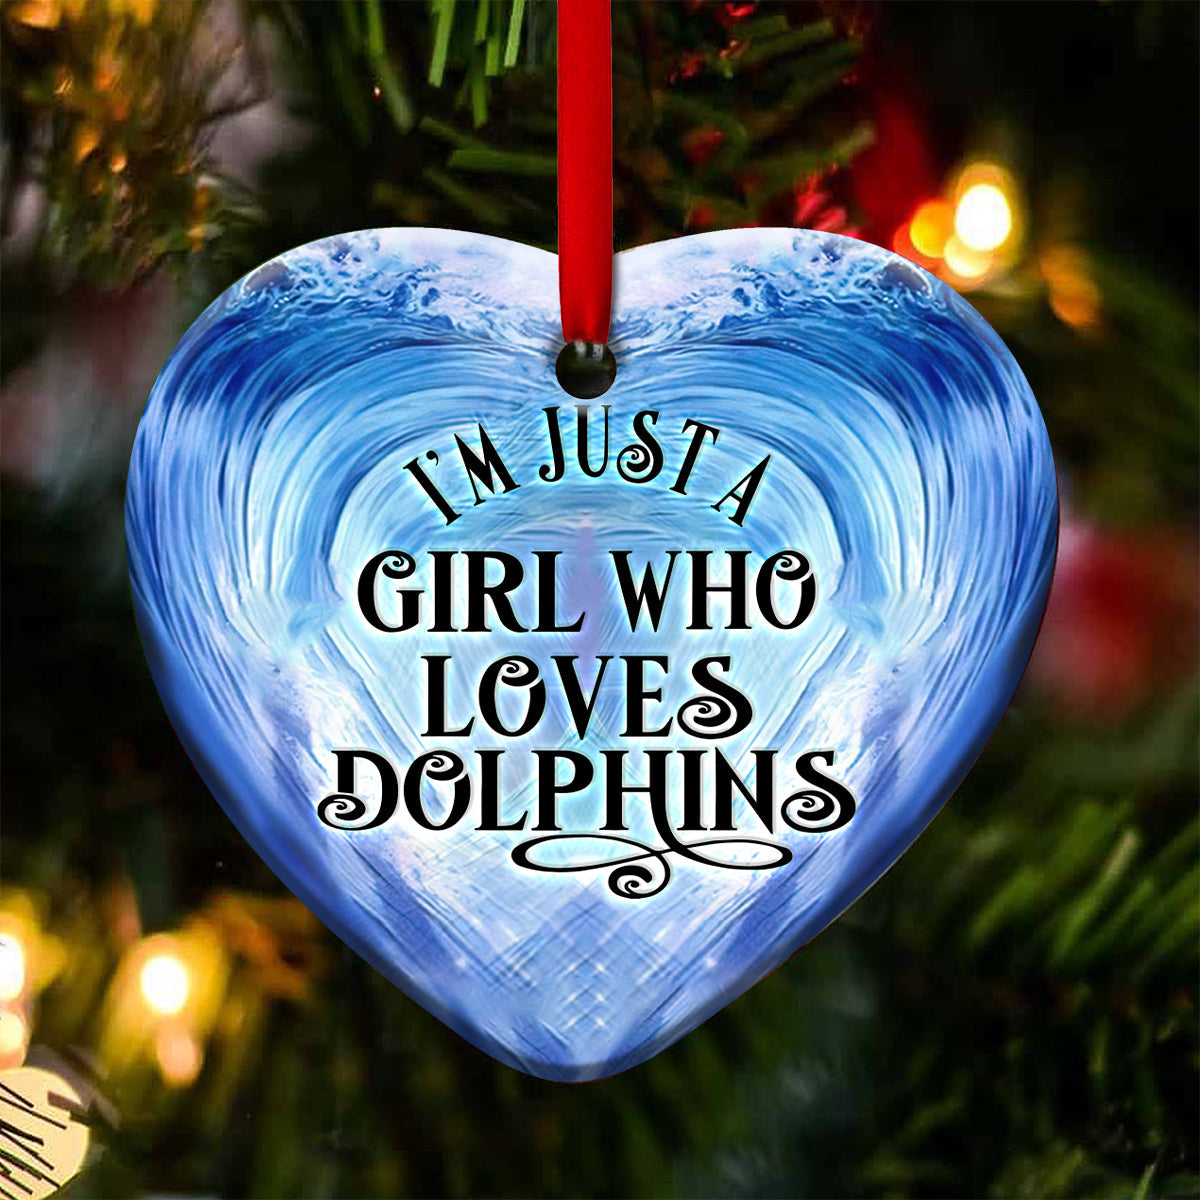 Dolphin Riding Wave Heart Ceramic Ornament - Christmas Ornament - Christmas Gift